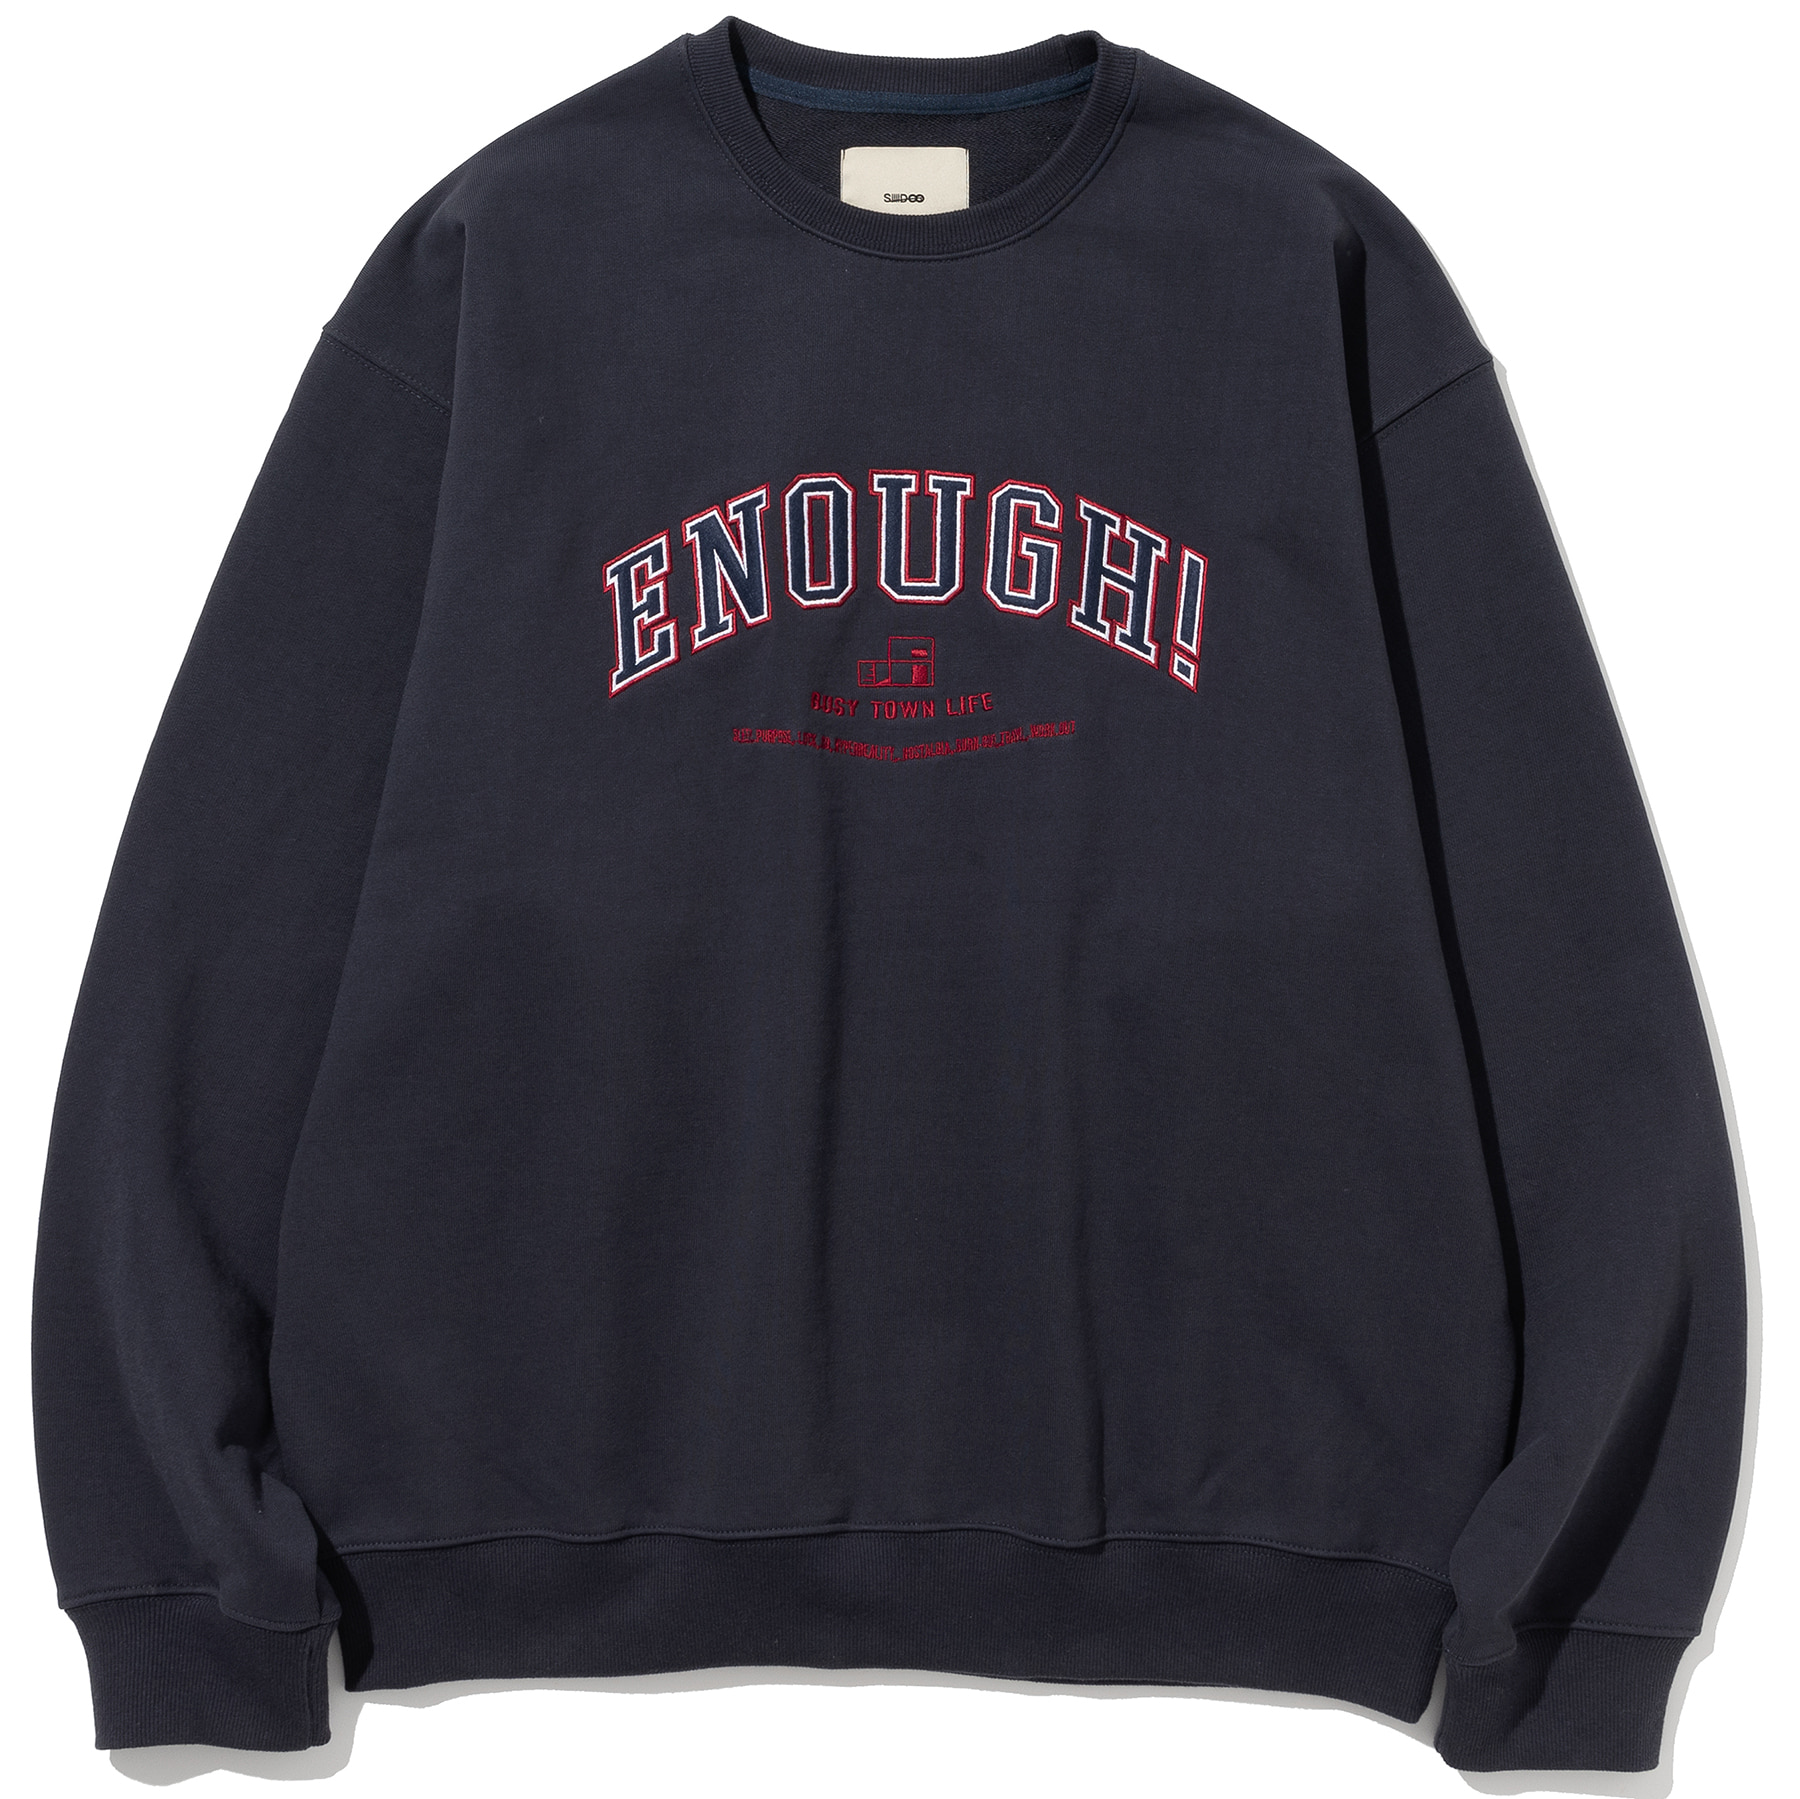 &#039;ENOUGH! BUSY TOWN LIFE&#039; VINTAGE SWEAT SHIRT #1(1st restock)